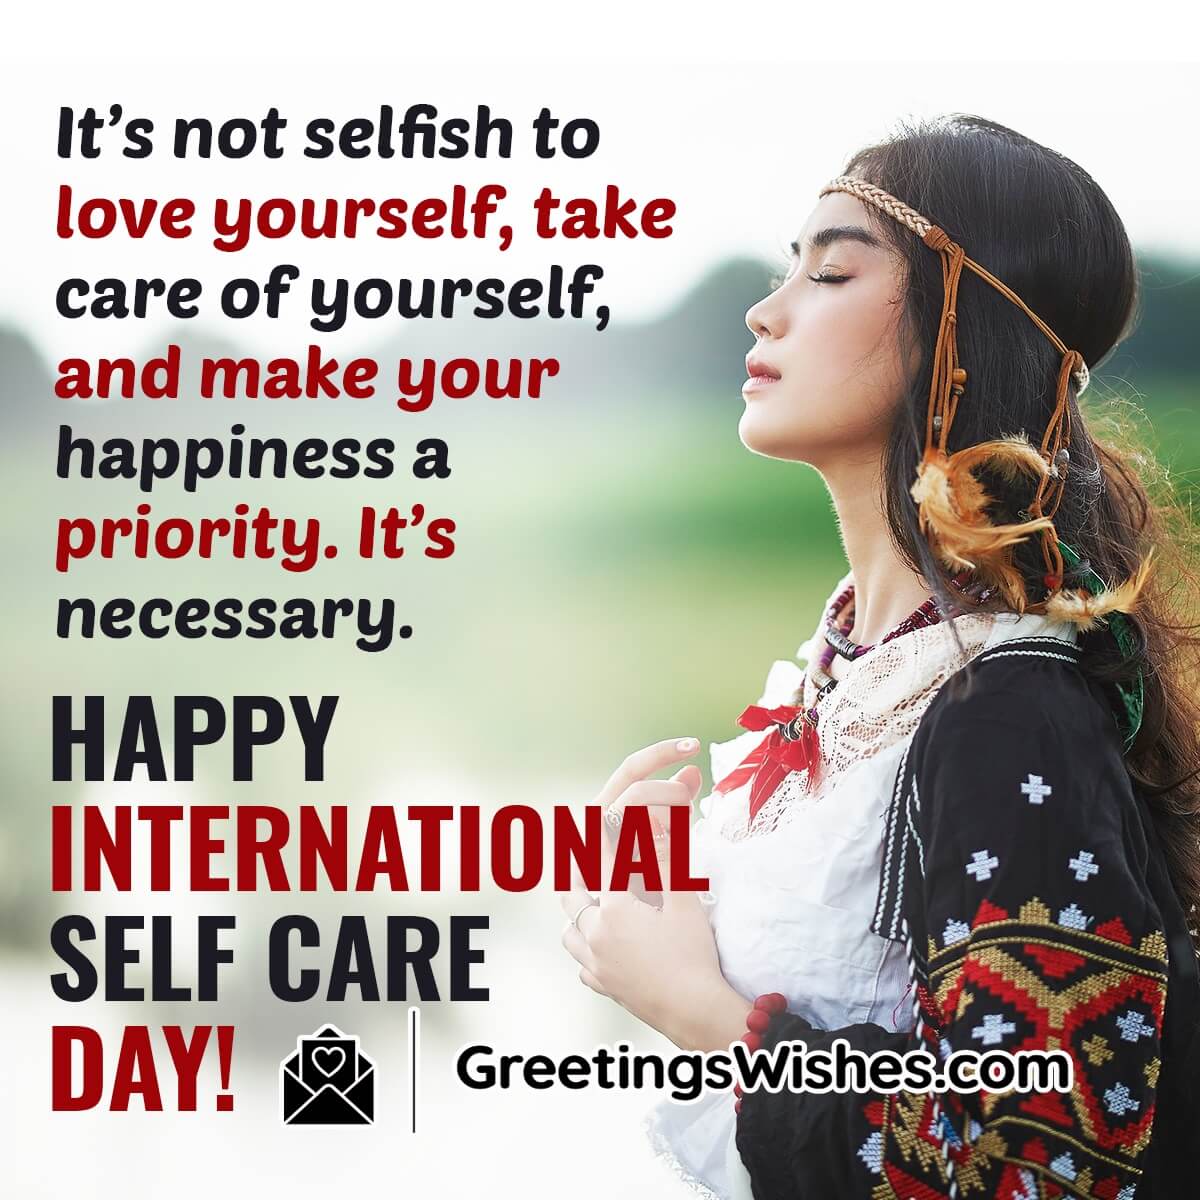 Happy International Self Care Day Message